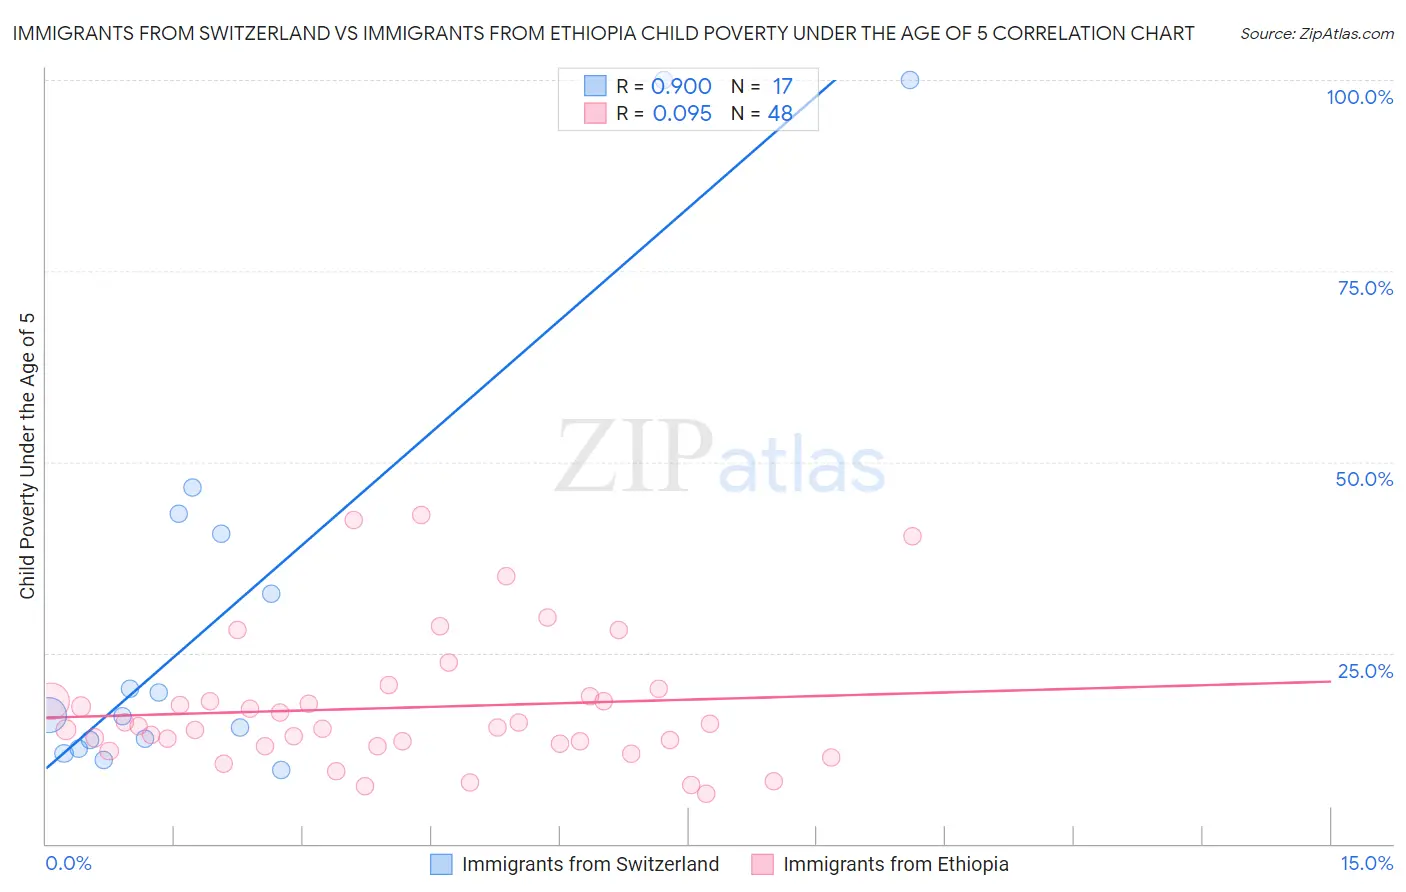 Immigrants from Switzerland vs Immigrants from Ethiopia Child Poverty Under the Age of 5